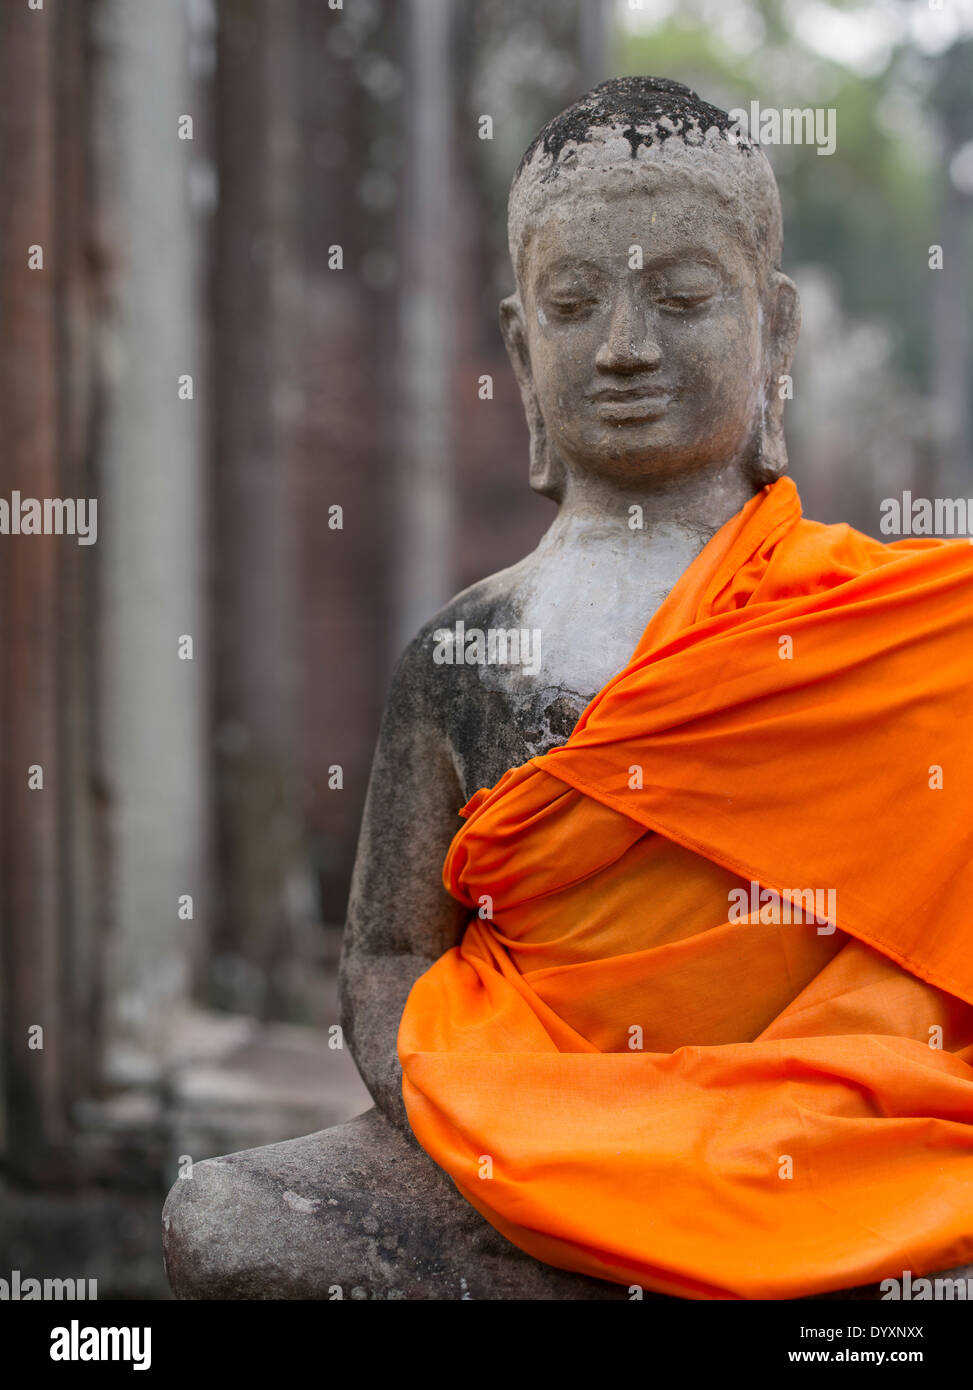 Buddhist statue in orange robes at Bayon Temple, Angkor Thom, Siem Reap, Cambodia Stock Photo